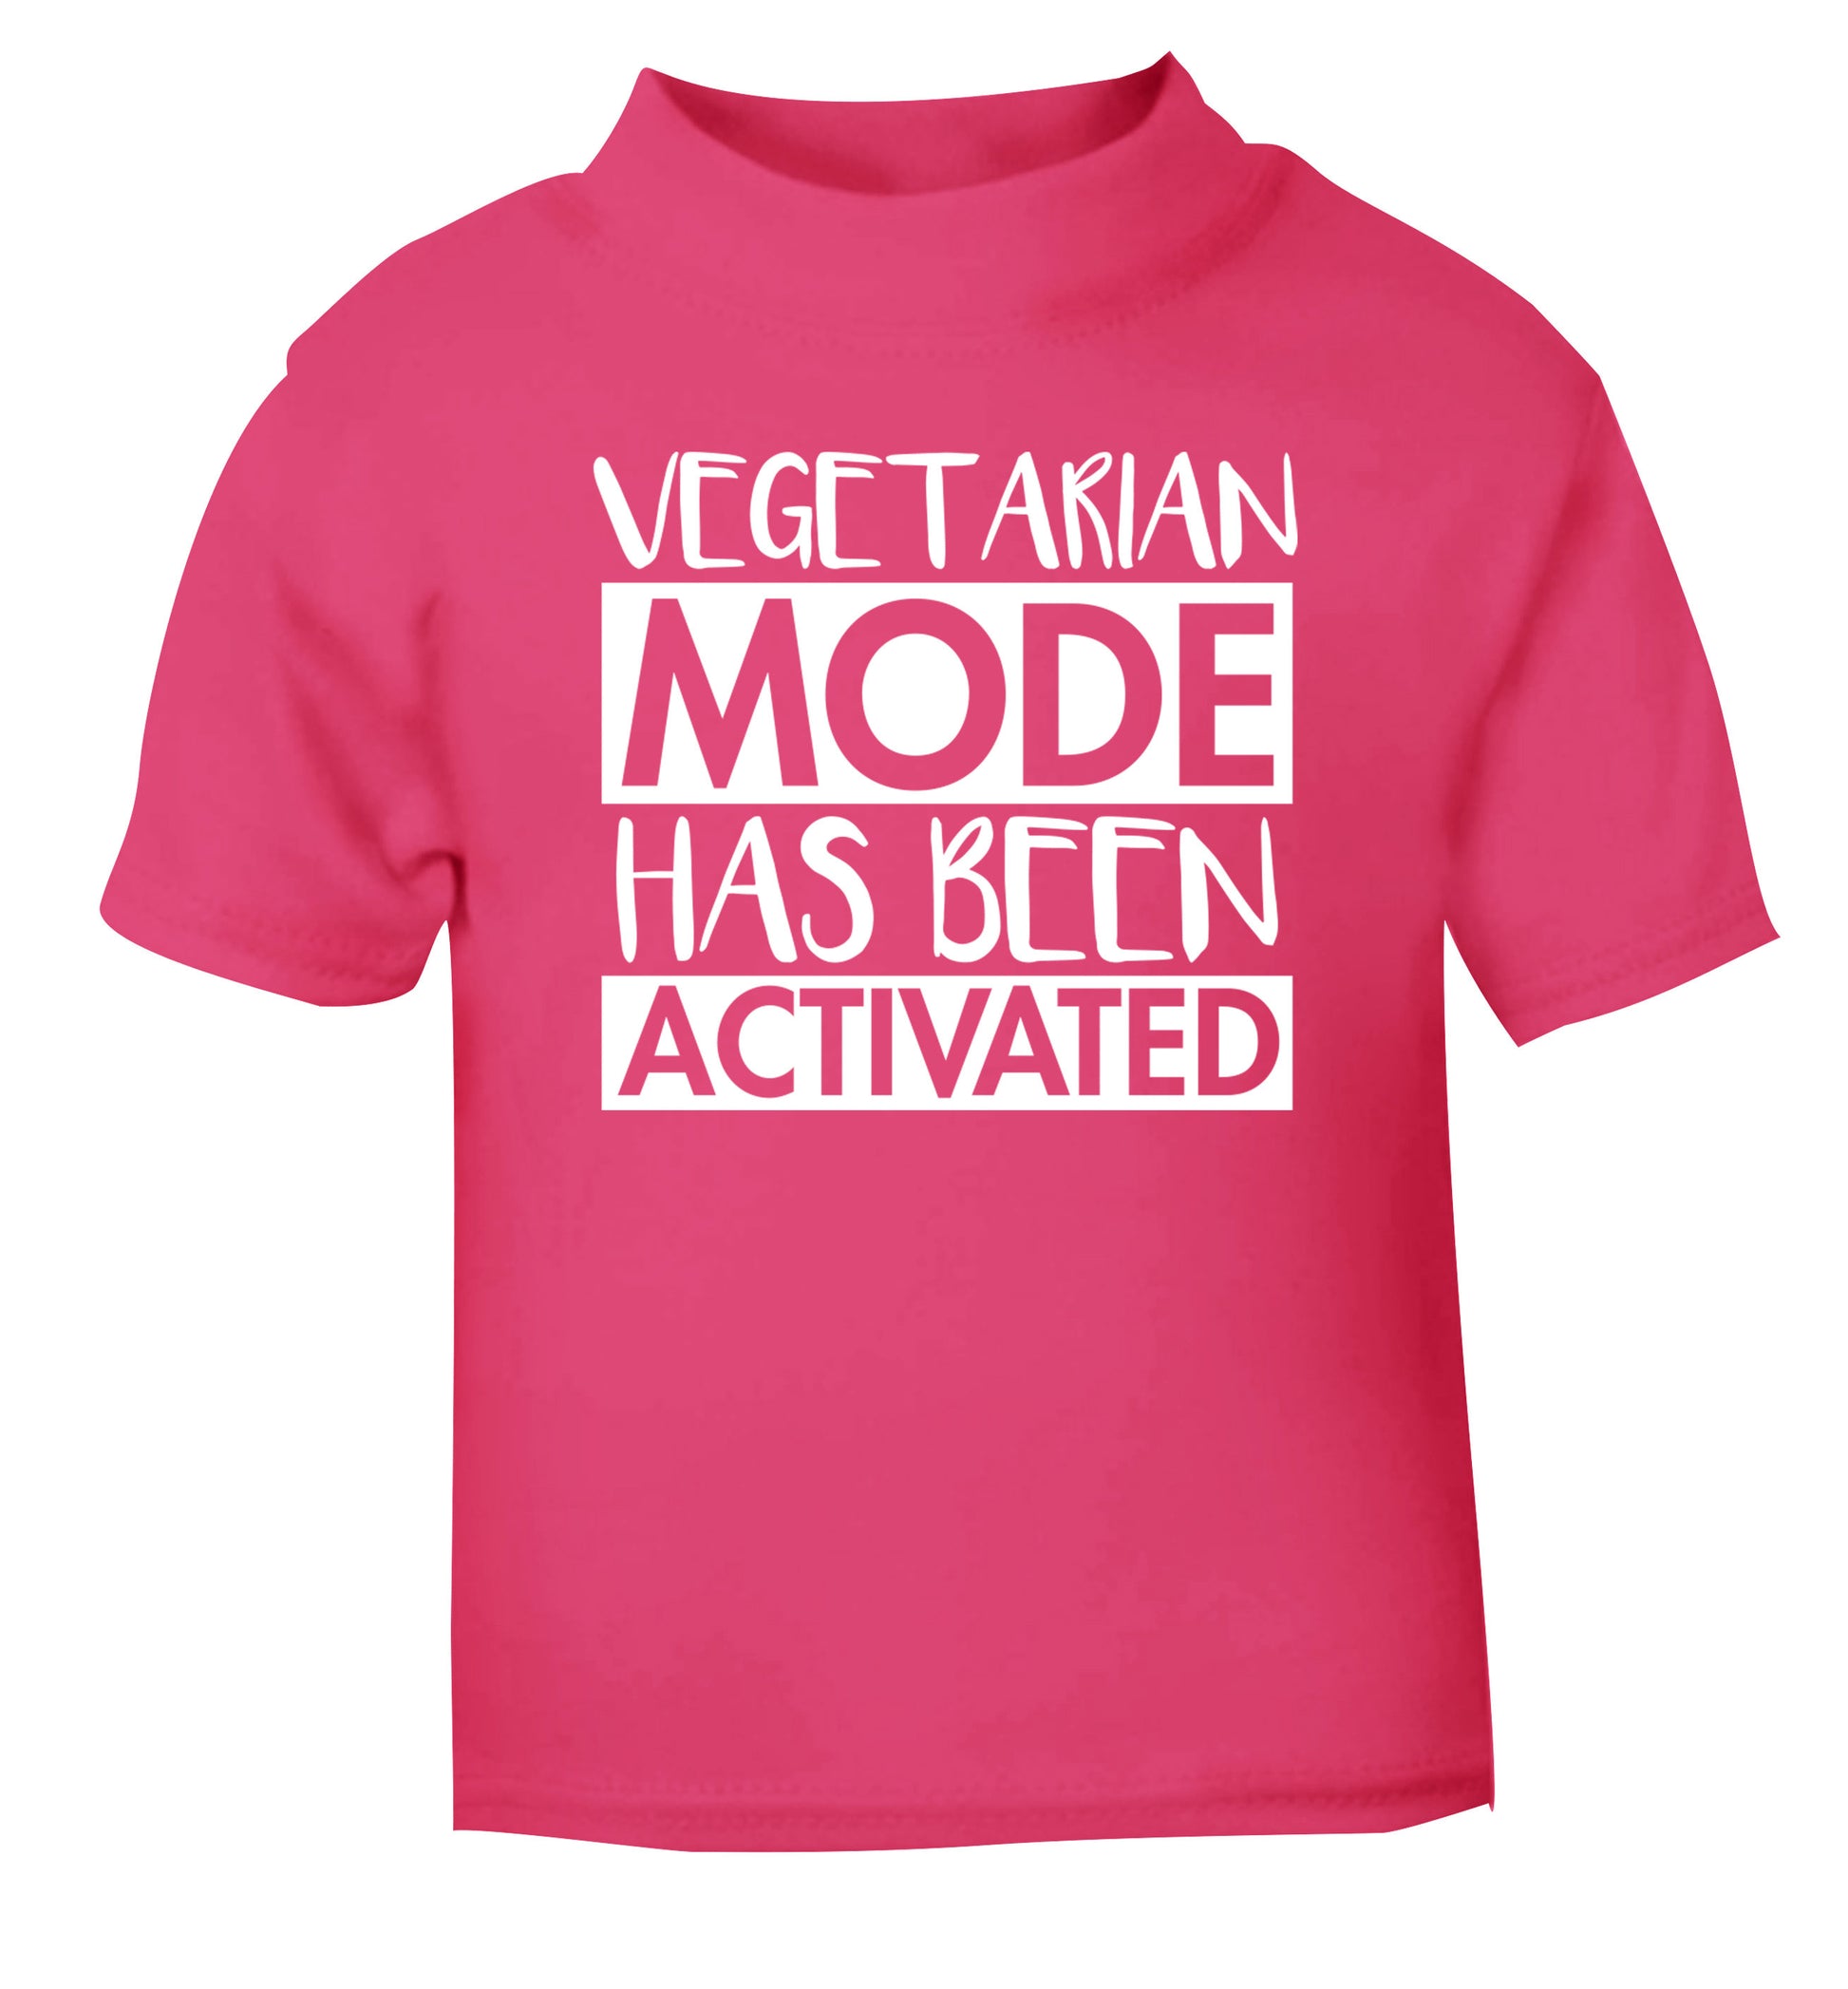 Vegetarian mode activated pink Baby Toddler Tshirt 2 Years